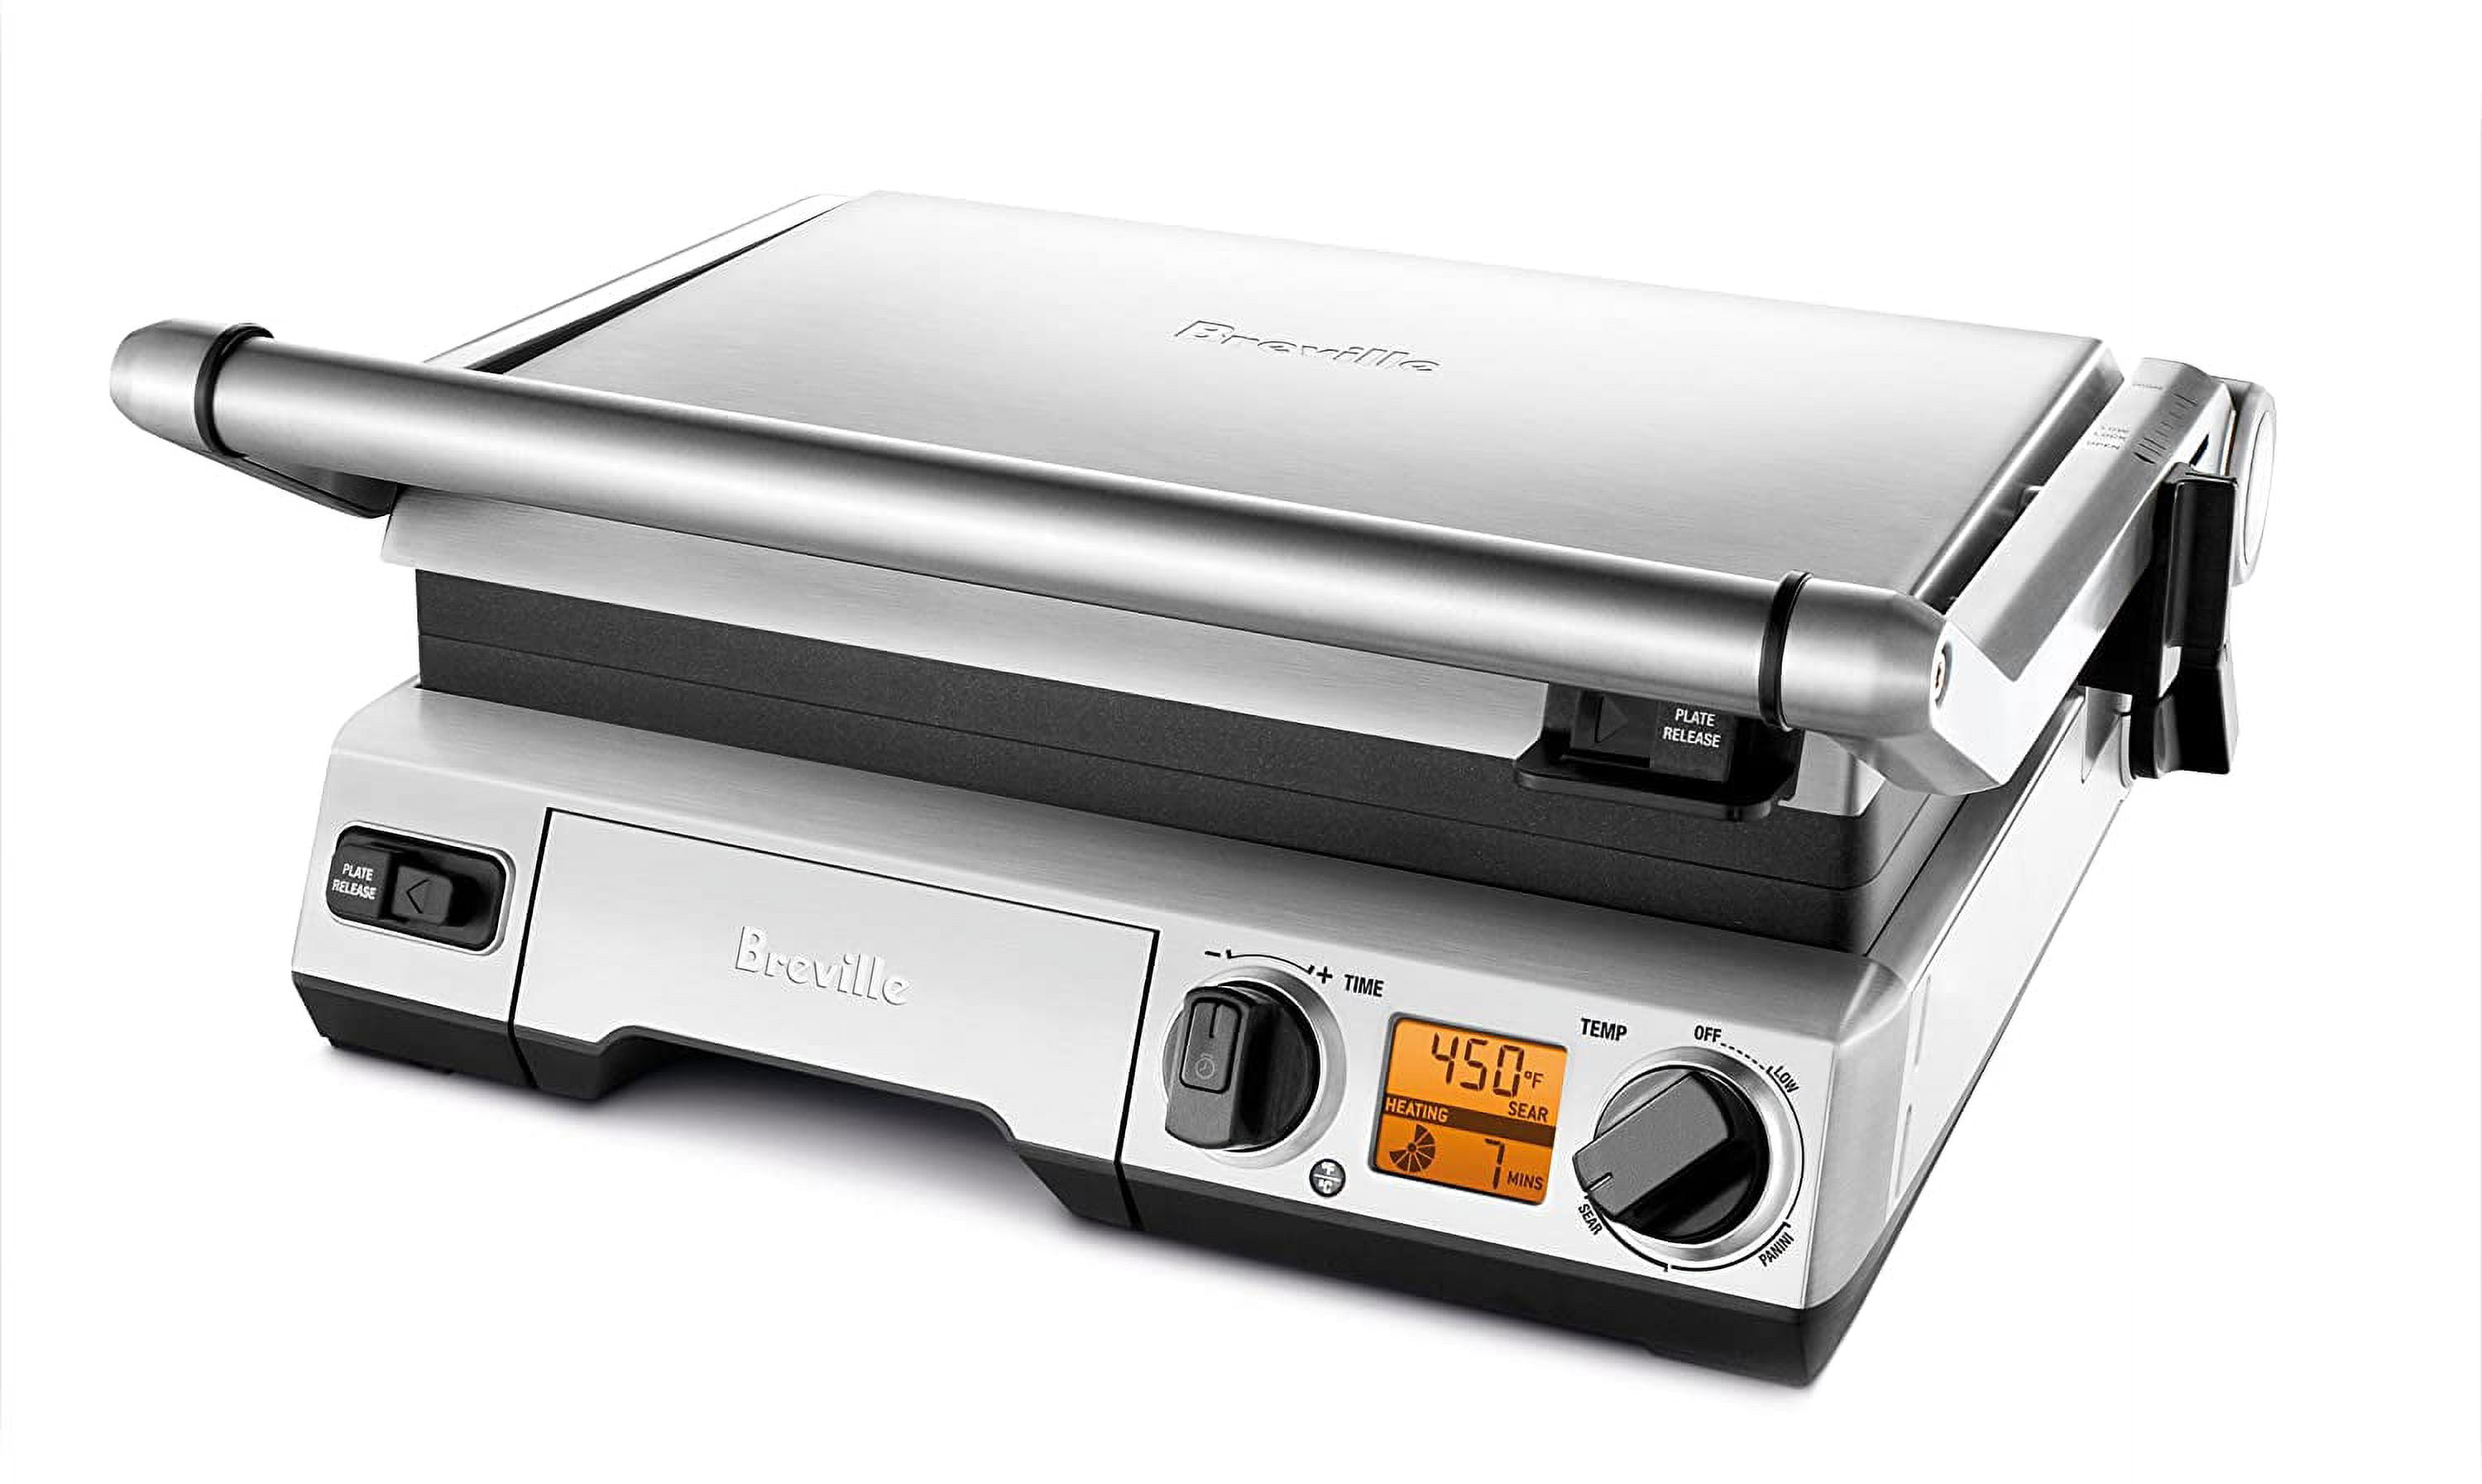 Breville BGR820XL Smart Grill, Electric Countertop Grill, Brushed Stainless  Steel., 14 x 14 x 5 3/4 Adjustable,Grill